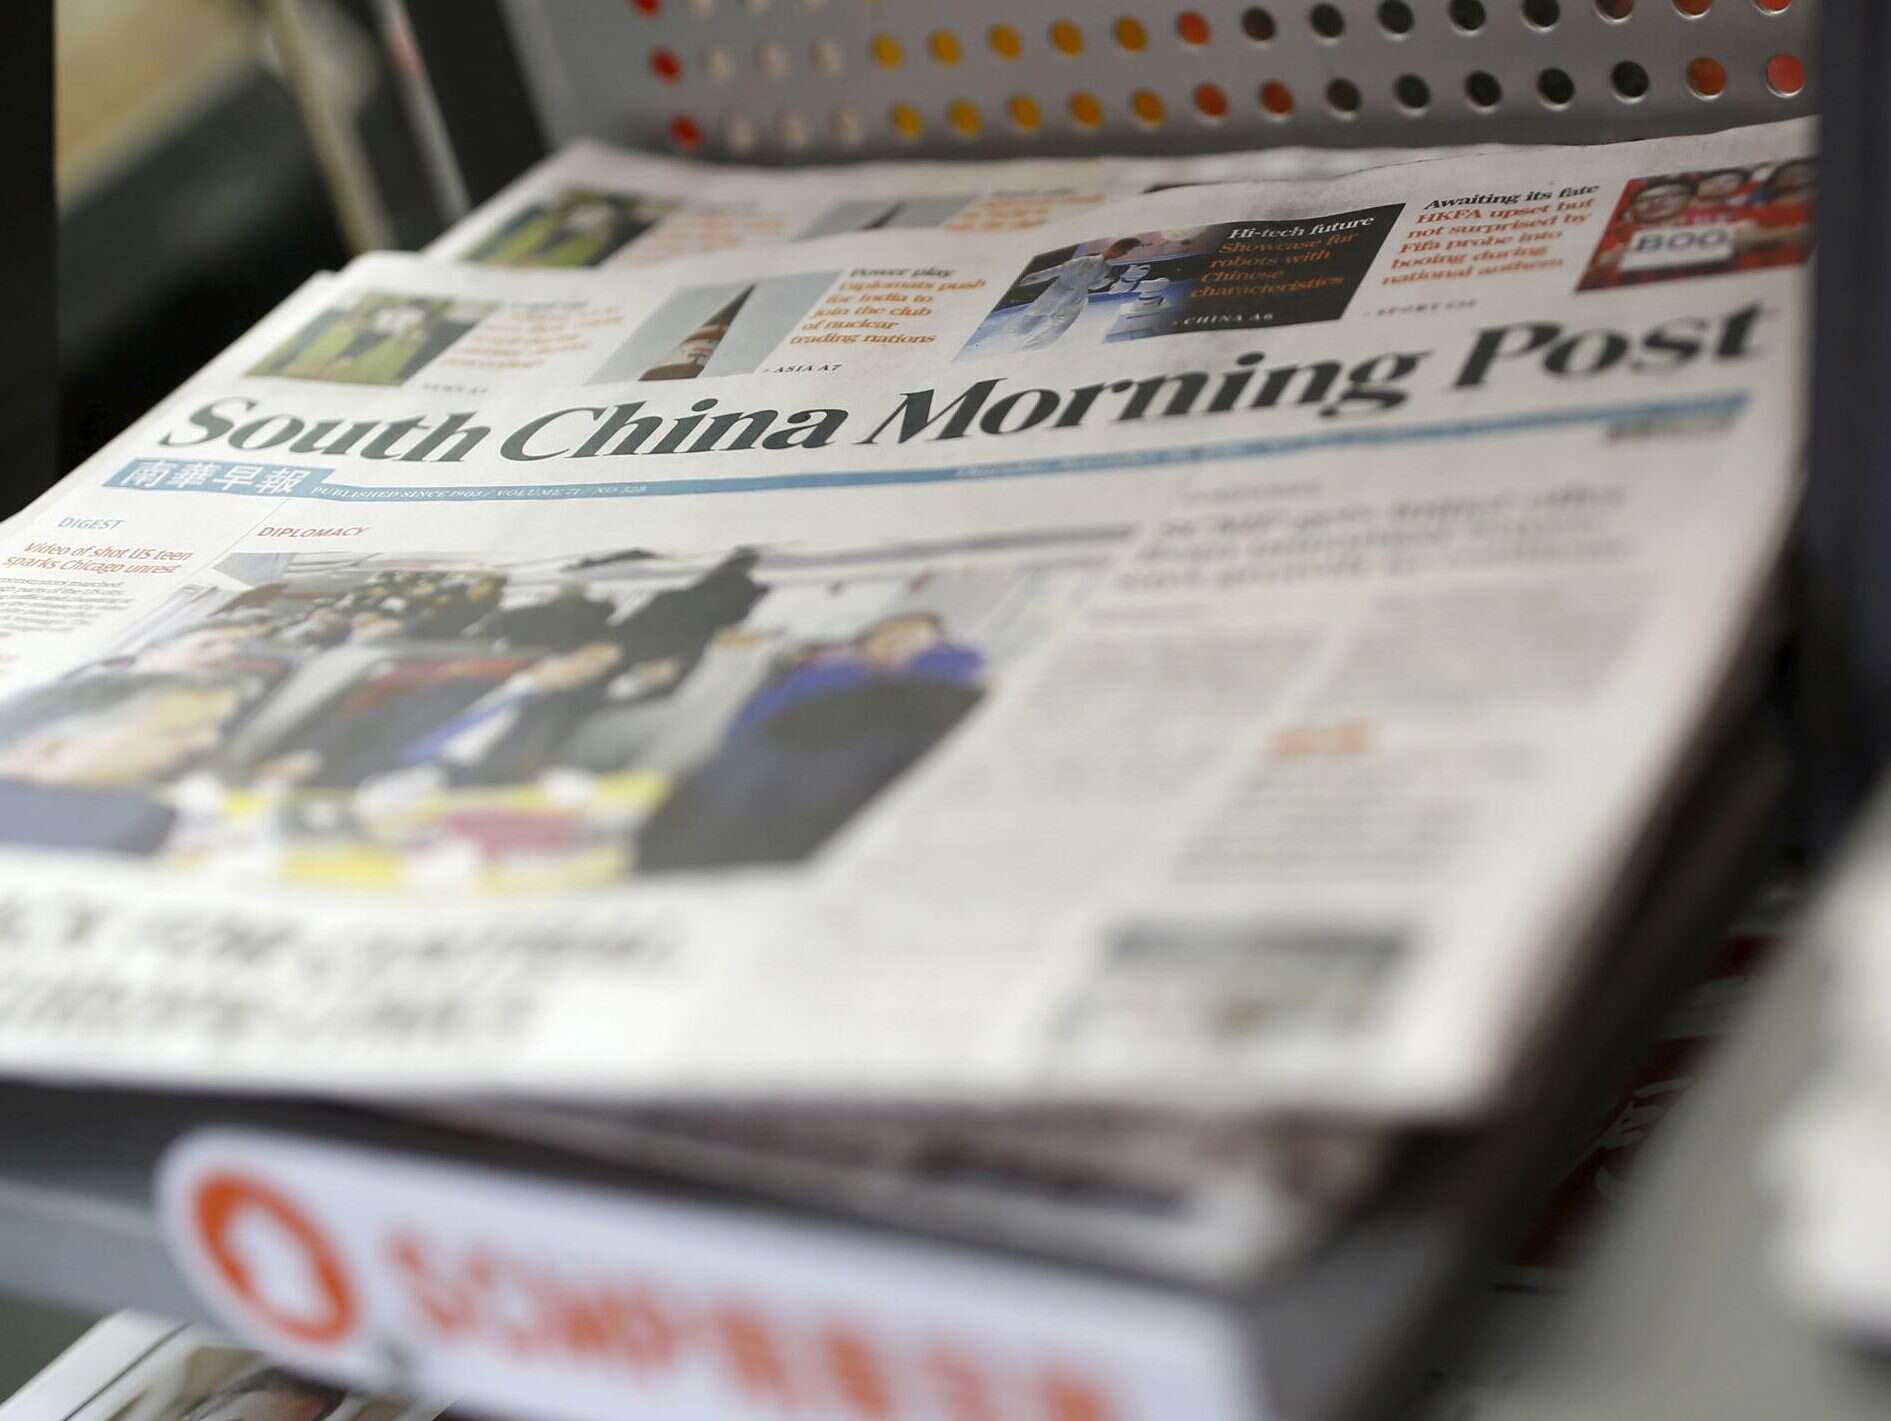 Reporters face 'unprecedented hurdles' in China as foreign correspondents targeted